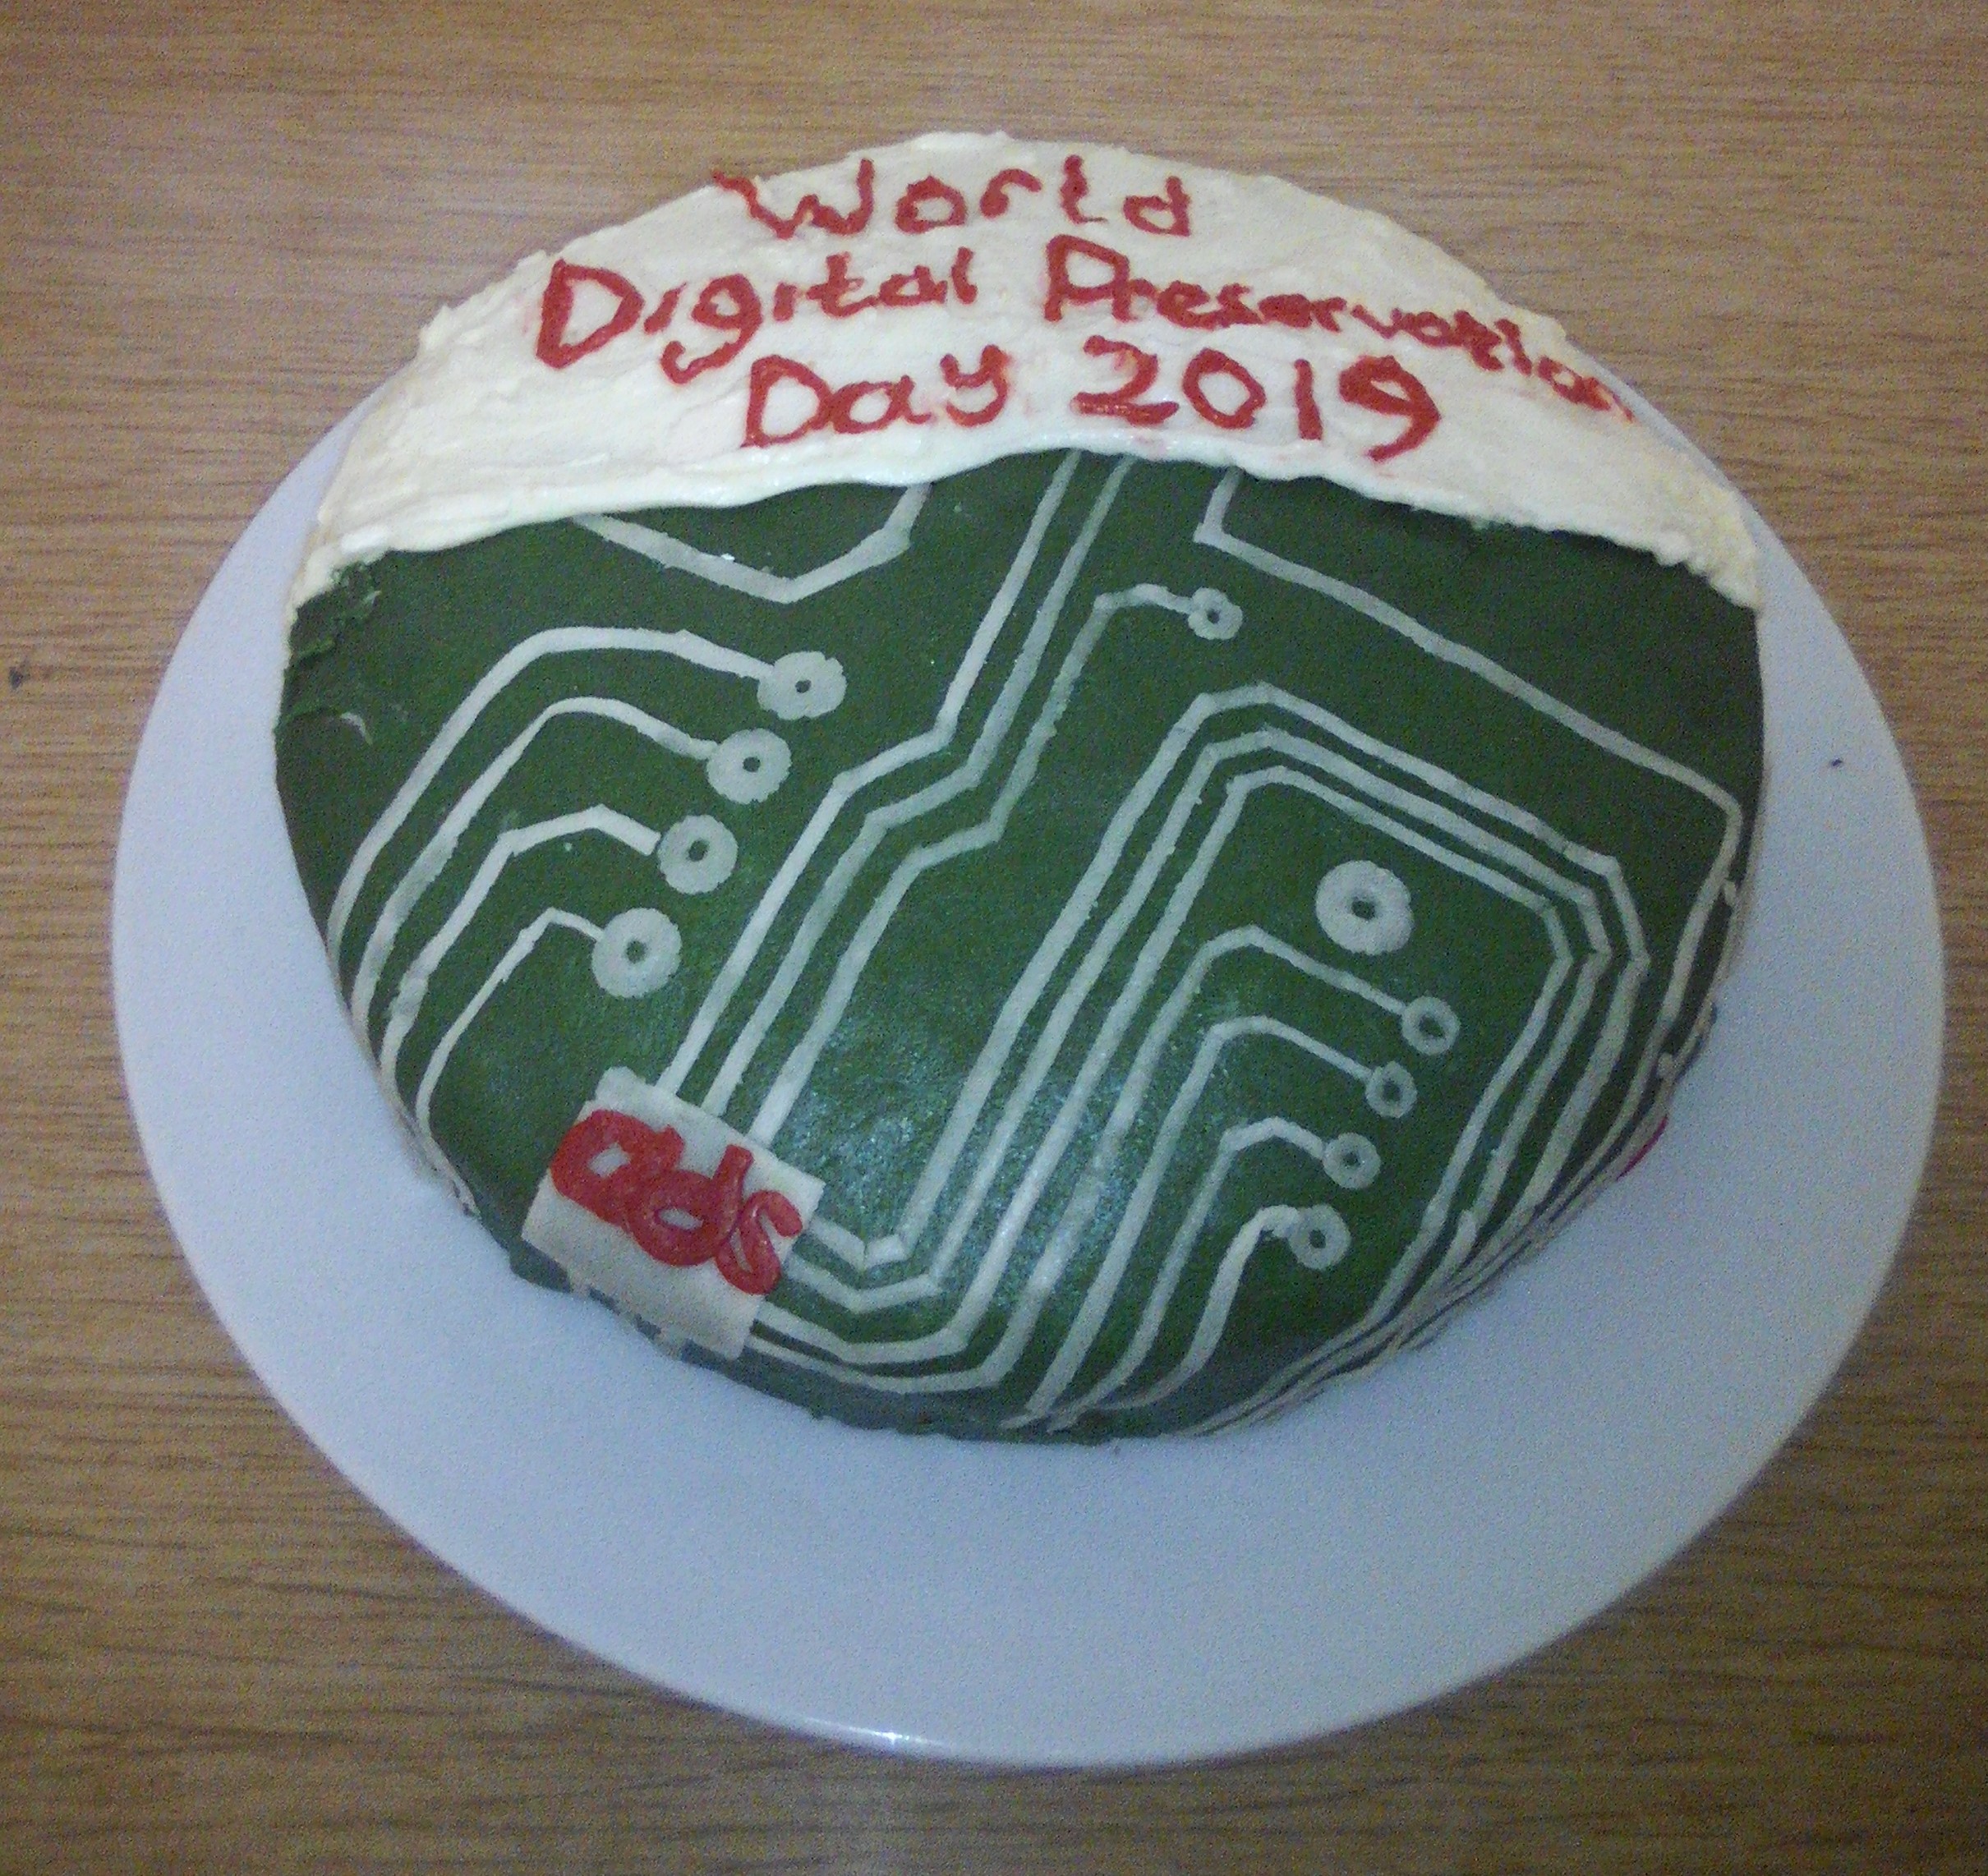 A cake with a green and white circuit board design and the text 'World Digital Preservation Day 2019'.